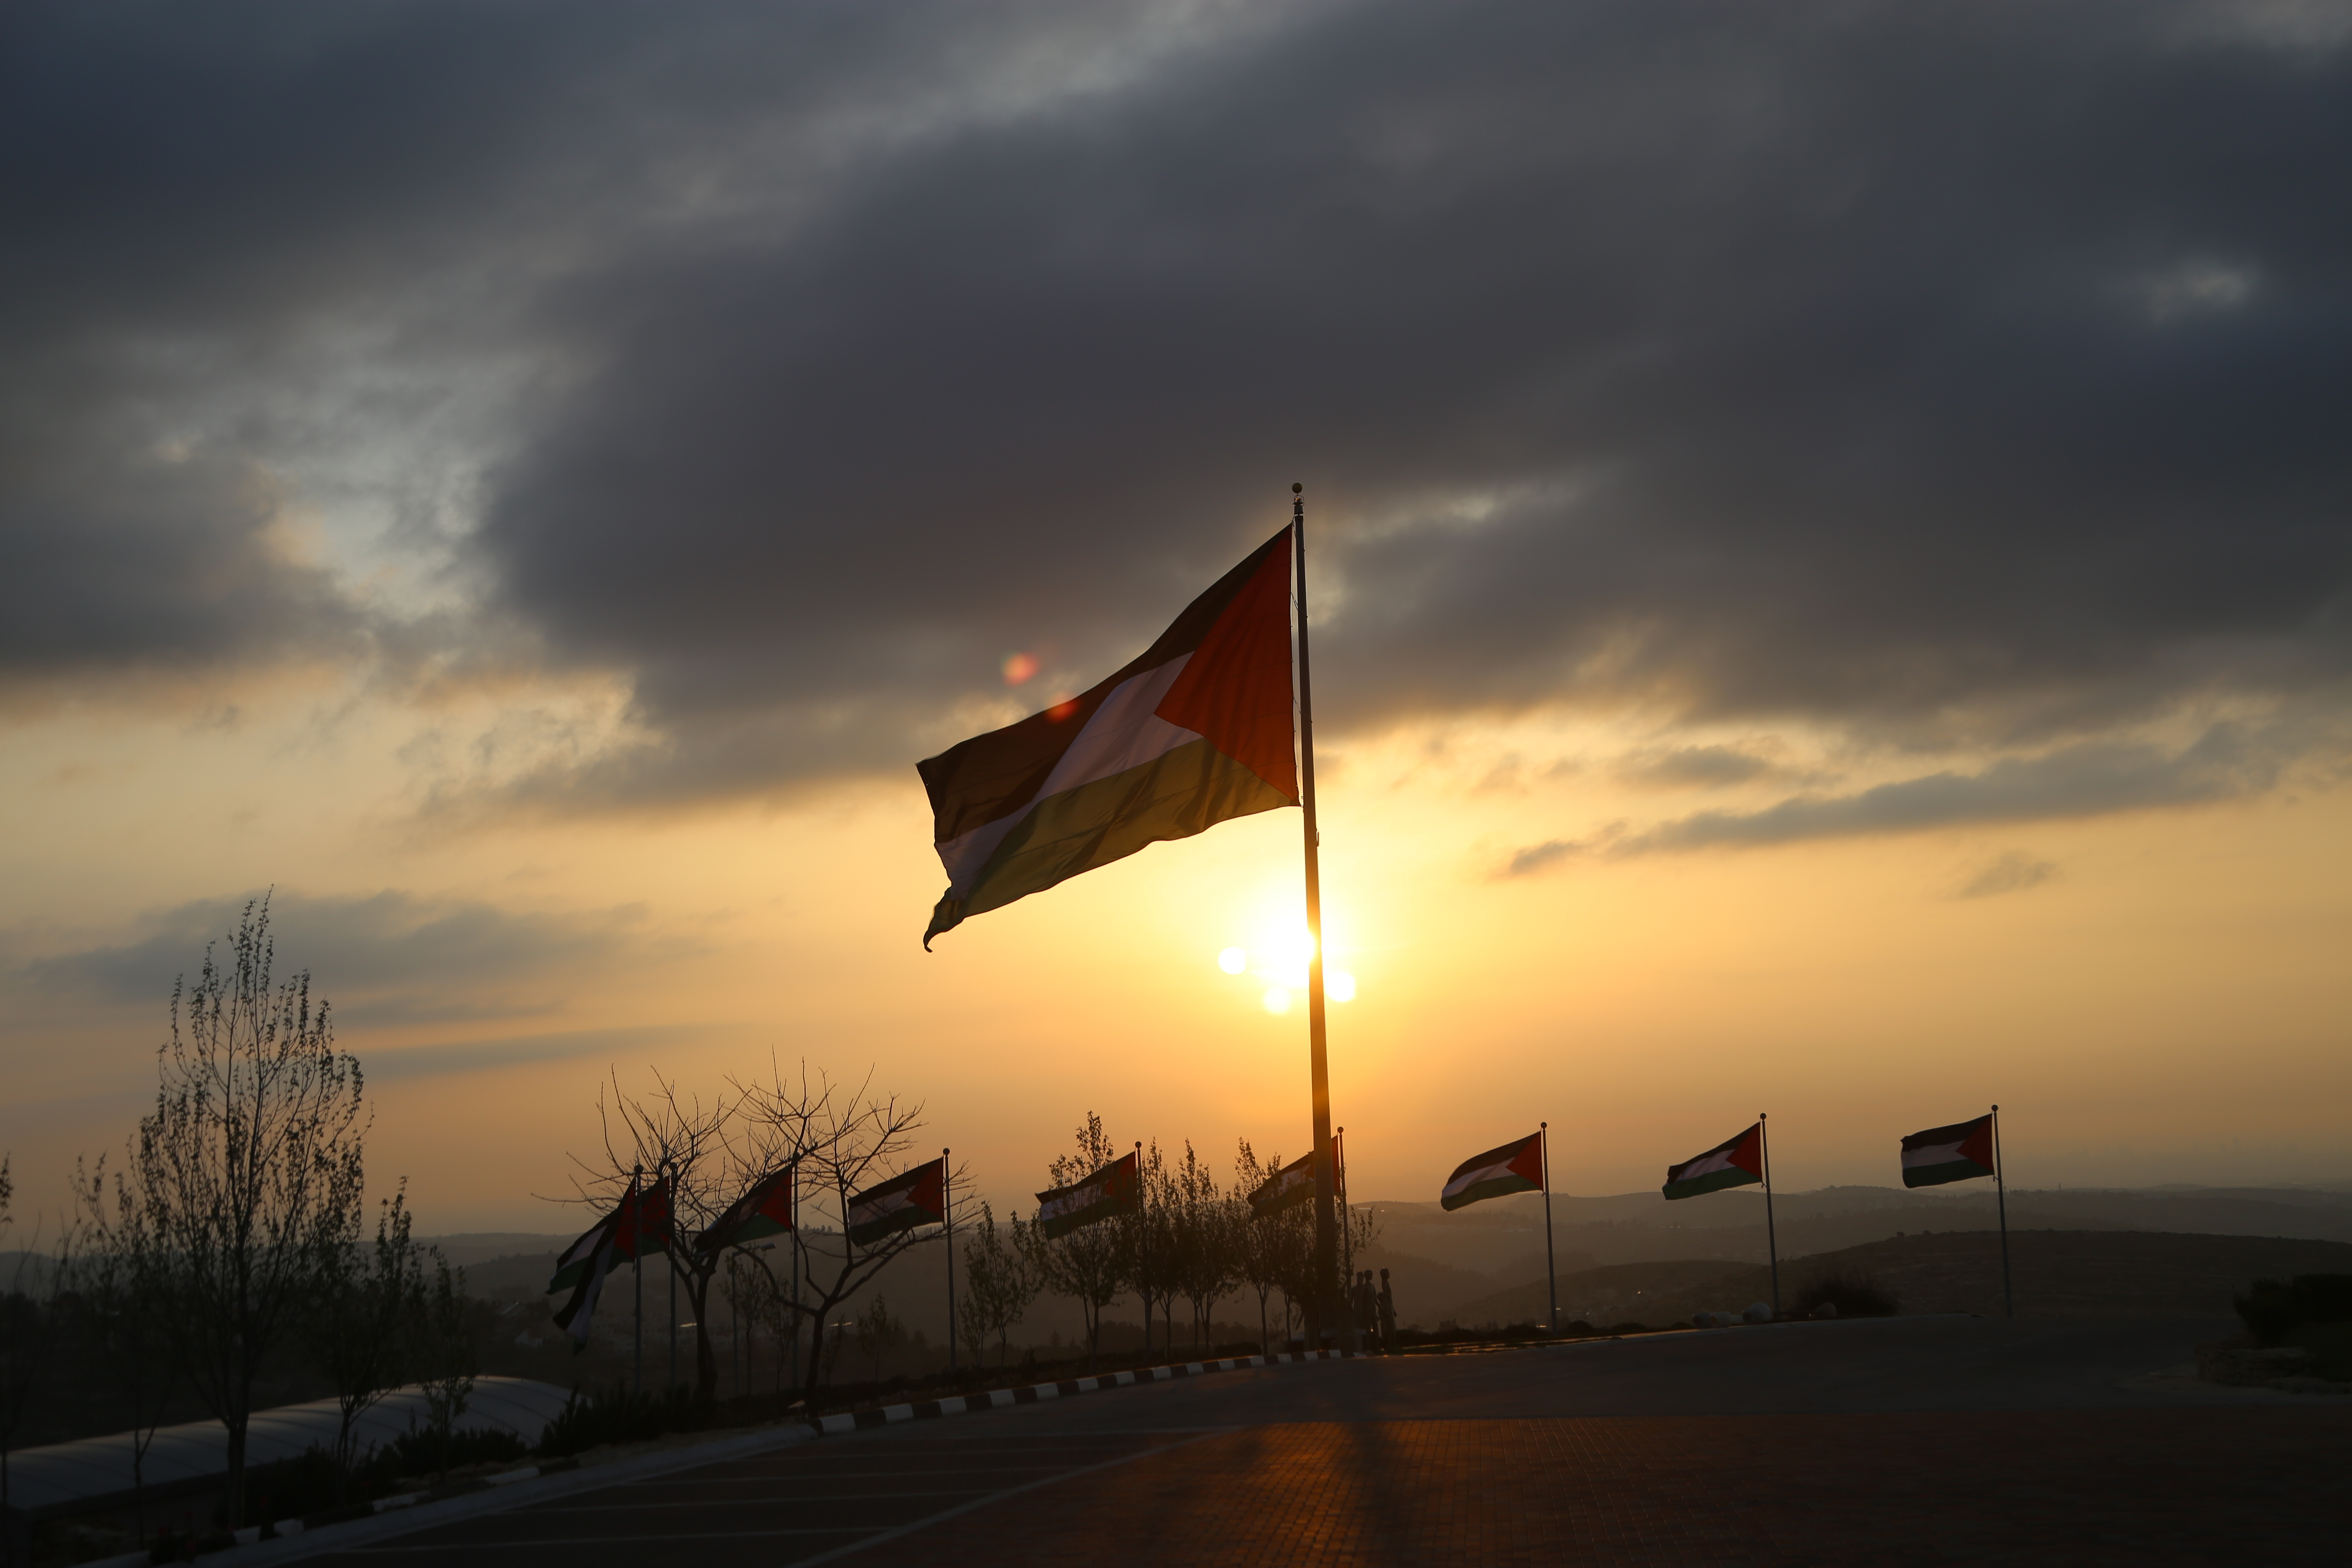 A Palestinian flag flies against the sunset on the top of the hill in Rawabi.